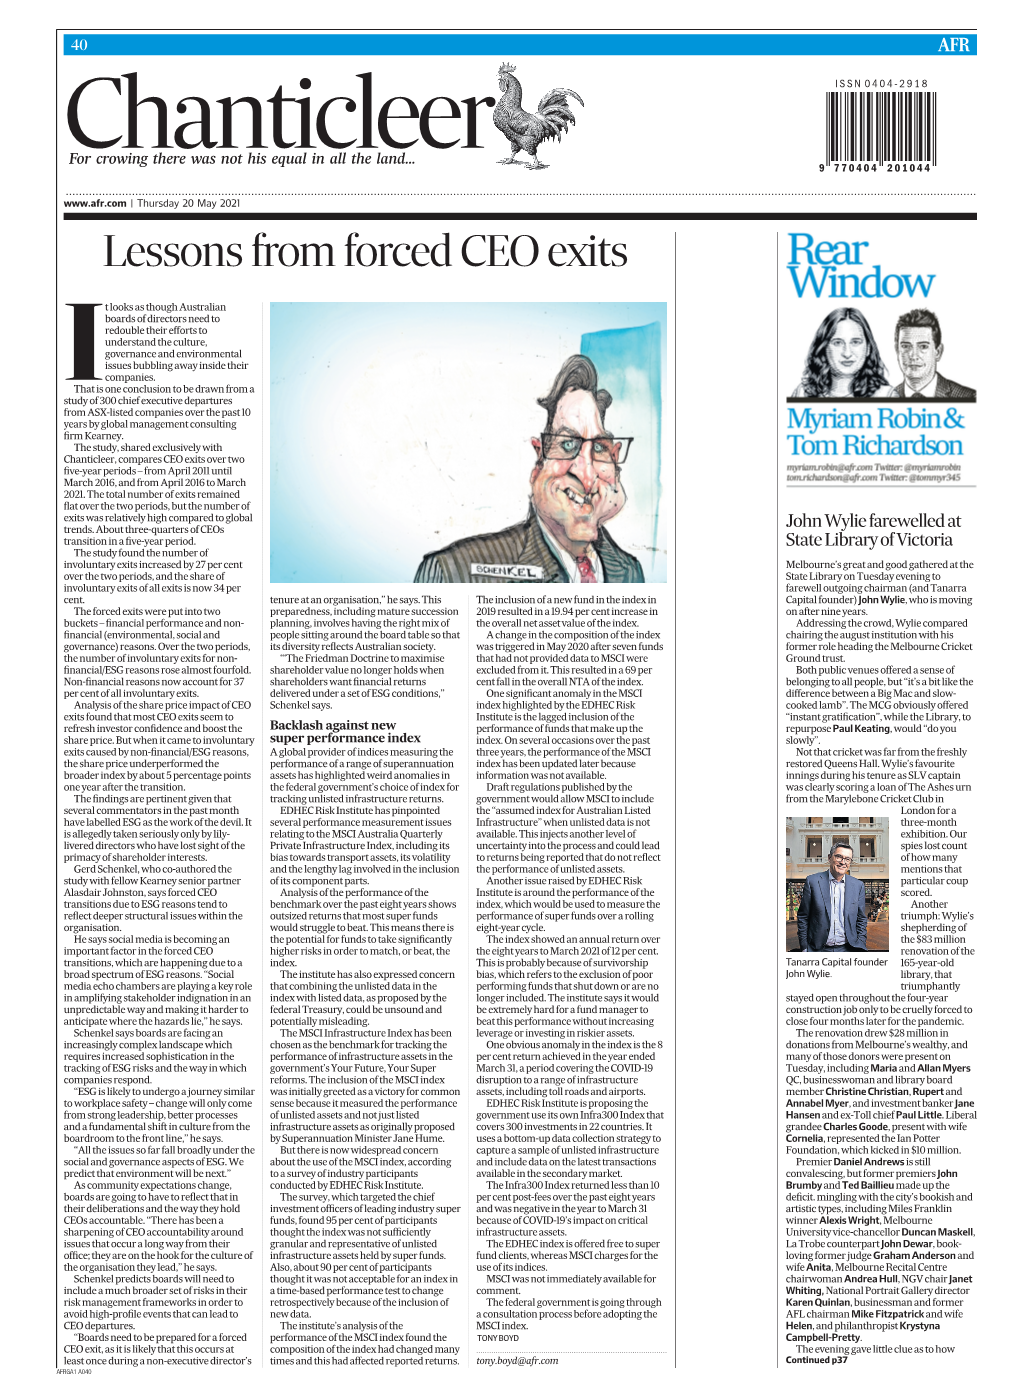 Lessons from Forced CEO Exits